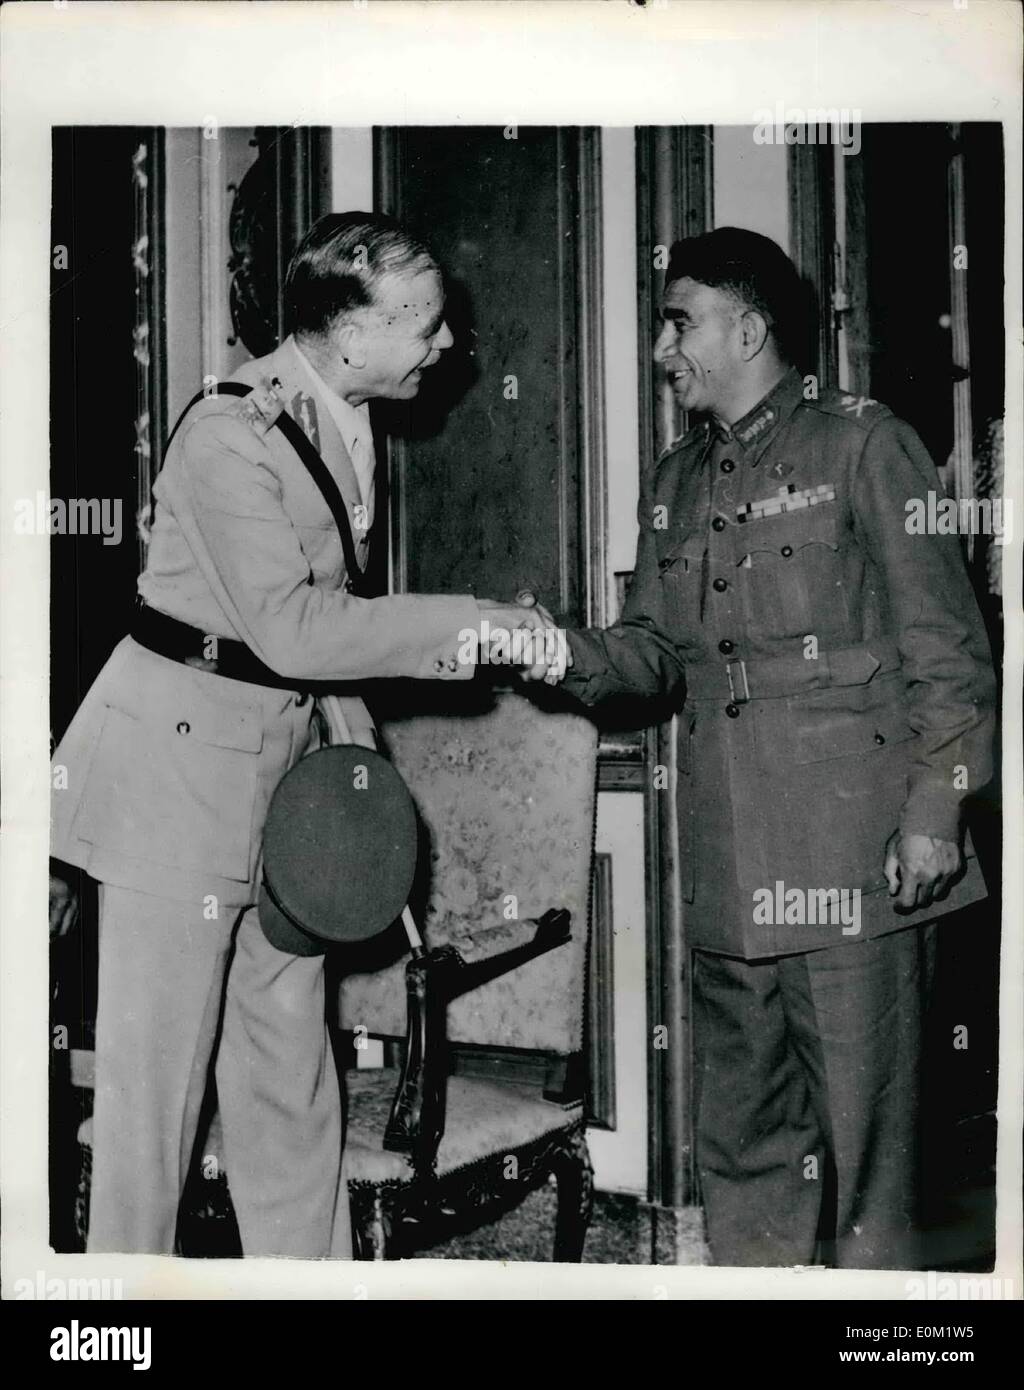 Apr. 04, 1953 - General Sir Brian Robertson Meets Prime Minister Neguib In Cairo. Photo Shows:- General Sir Brian Robertson, former C-in-C Middle East Land Forces, and joint leader of the British team taking part in the Suez Canal talks, being greeted by Prime Minister Neguib, when he paid a courtesy visit to the Premier in Cairo. Stock Photo